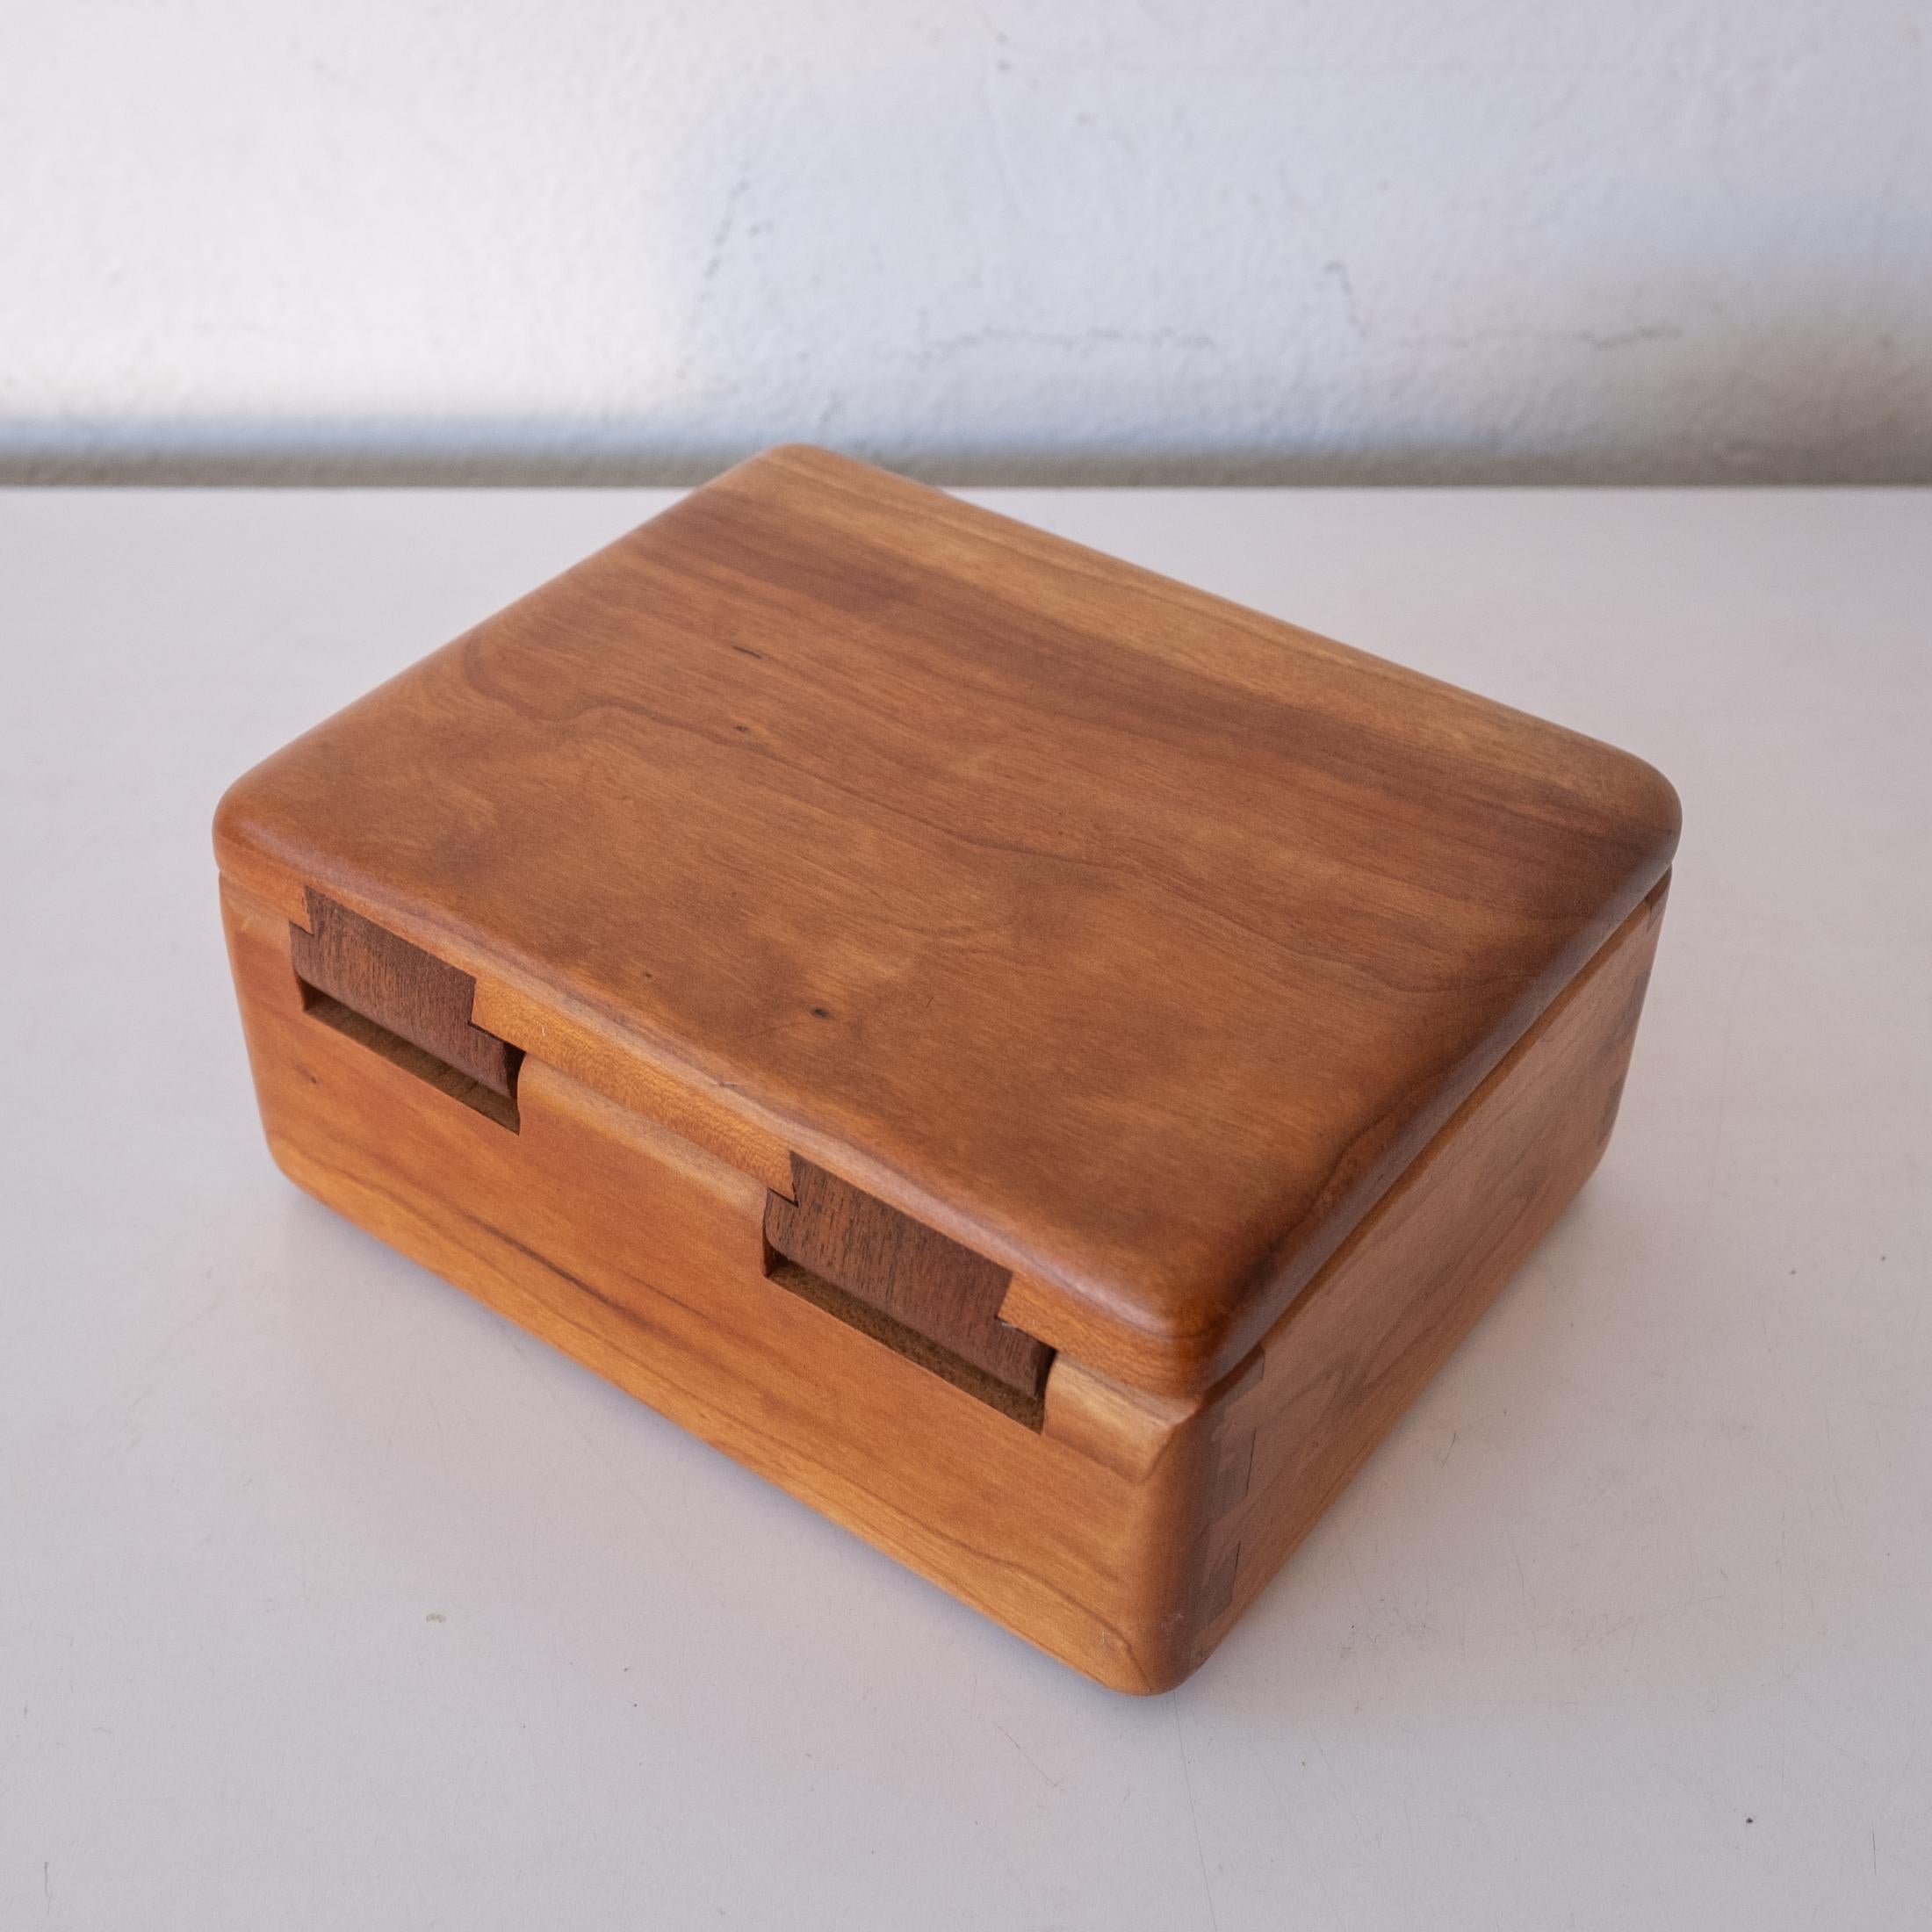 Studio Handcrafted Wood Jewelry Box 1970s For Sale 2